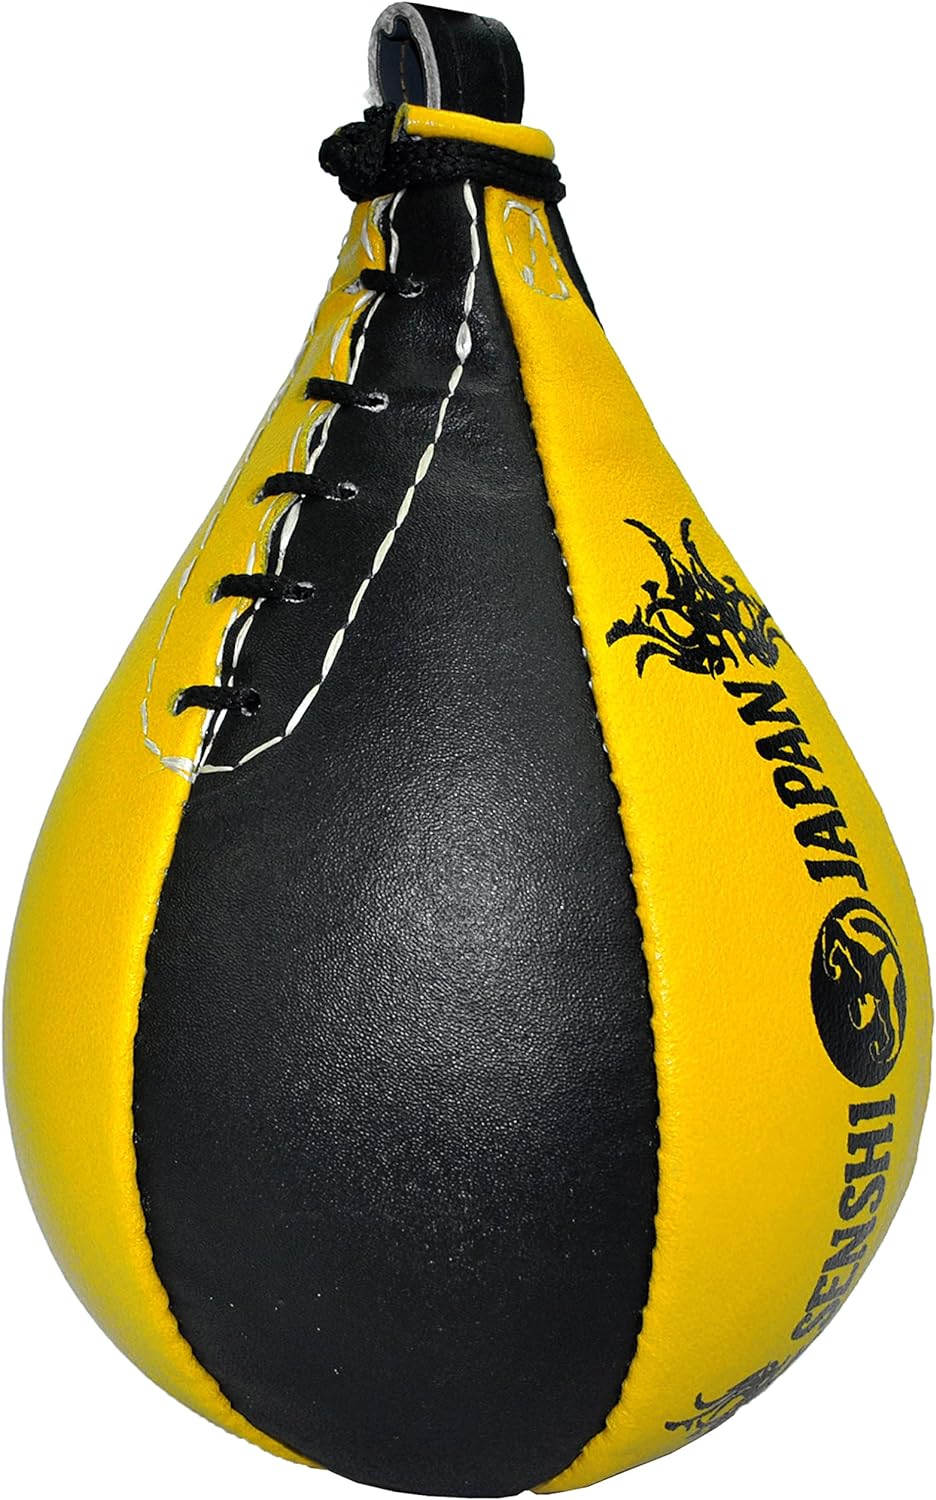 Leather speed ball